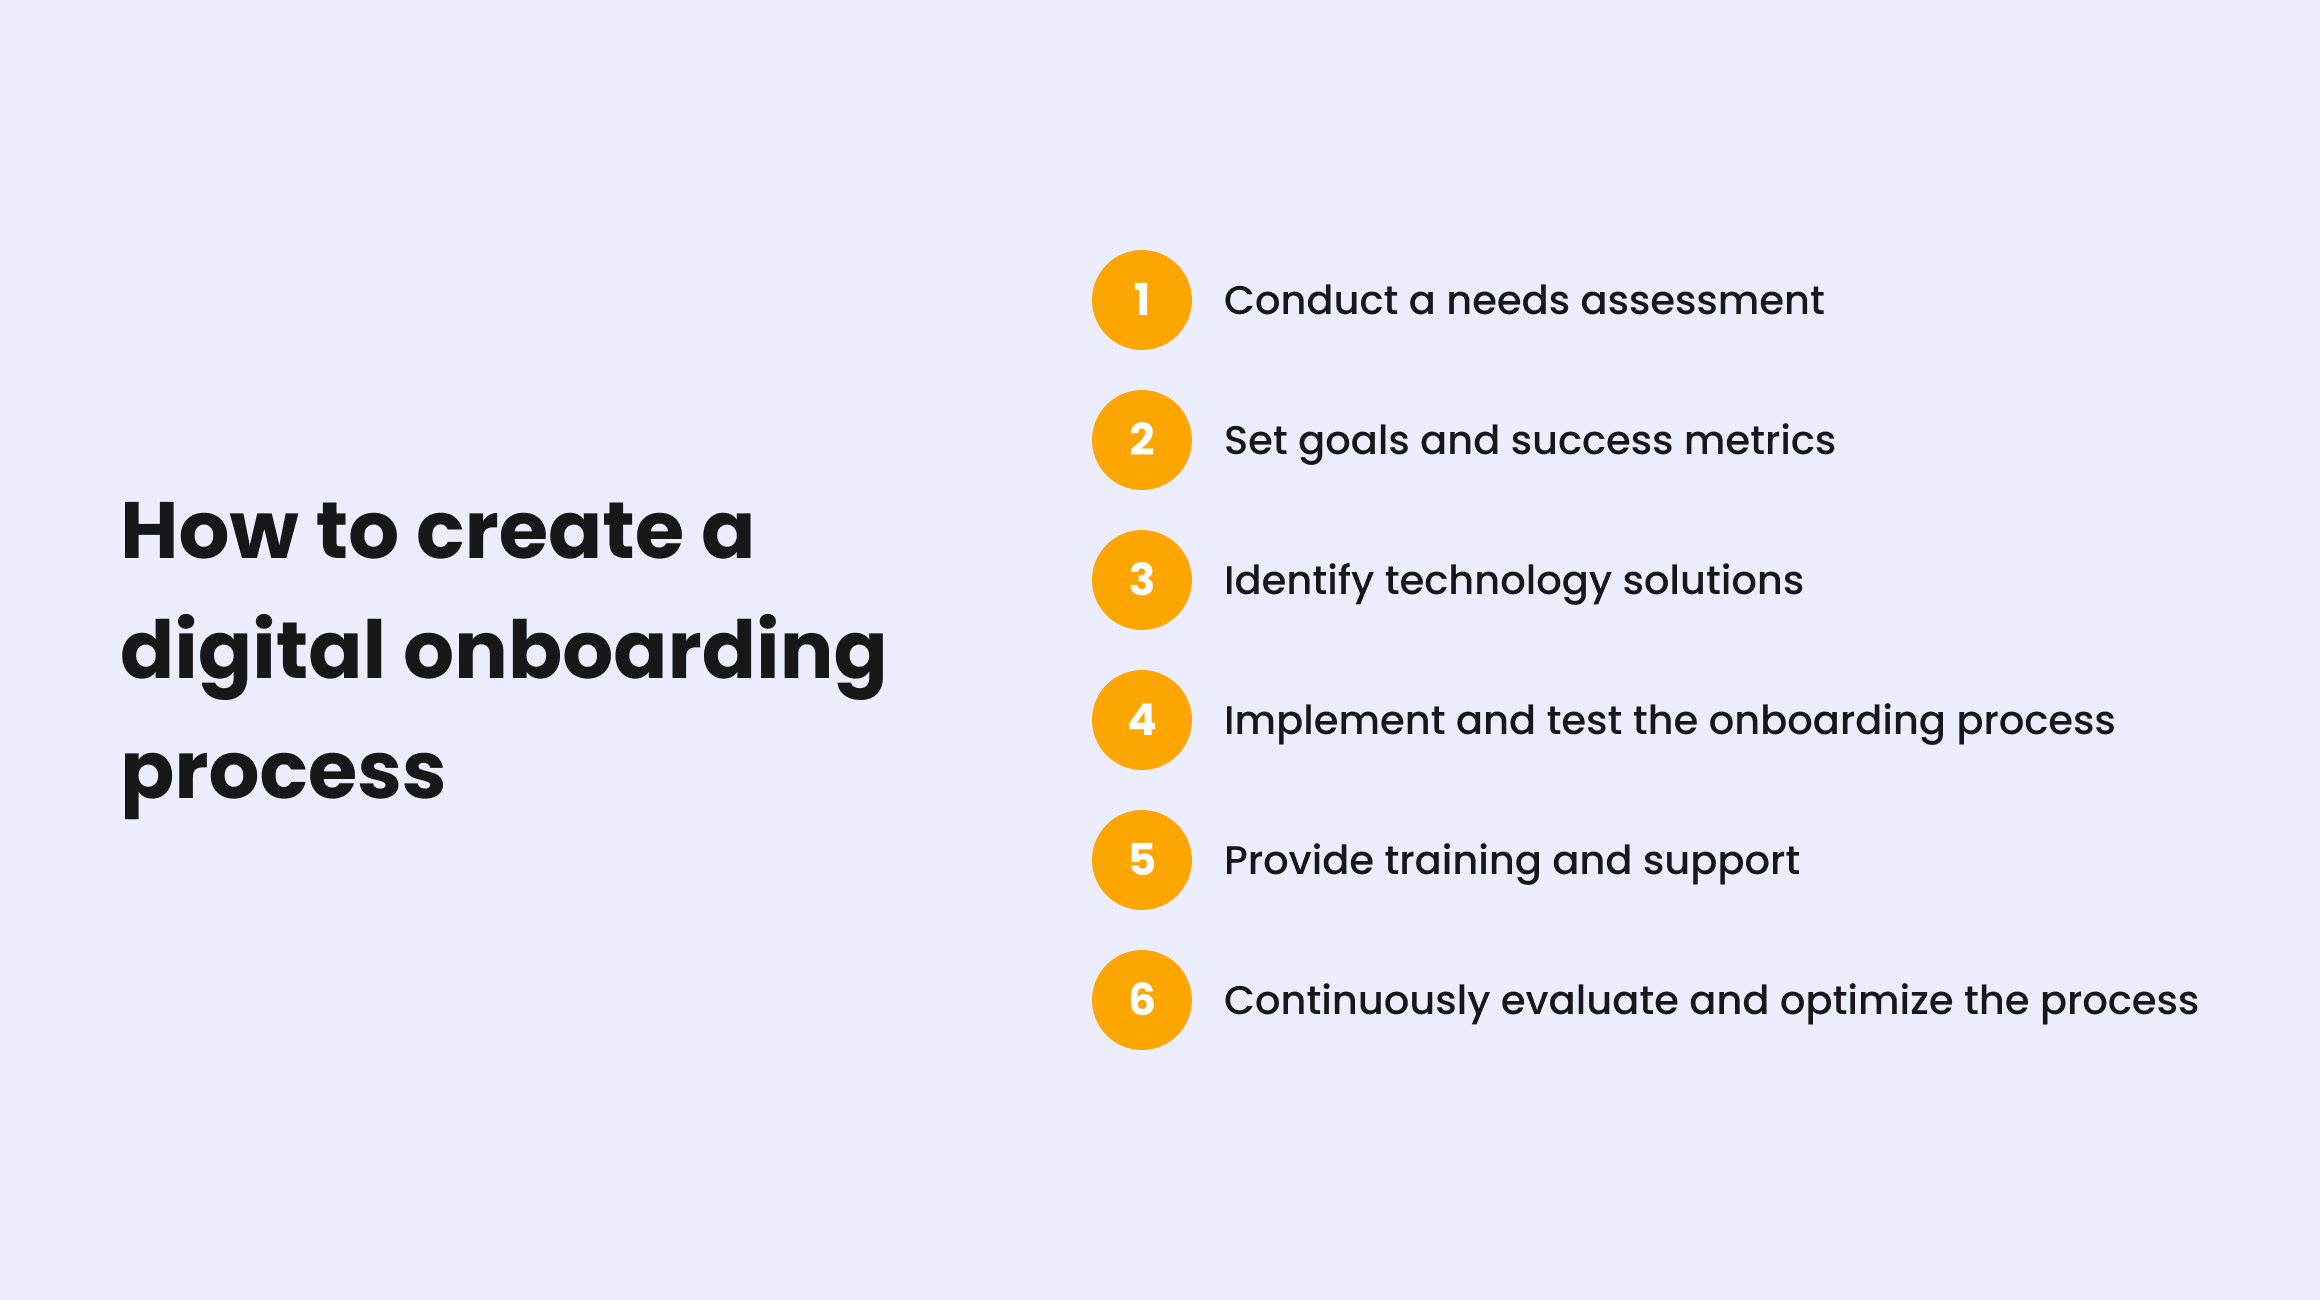 Steps to build a digital onboarding process